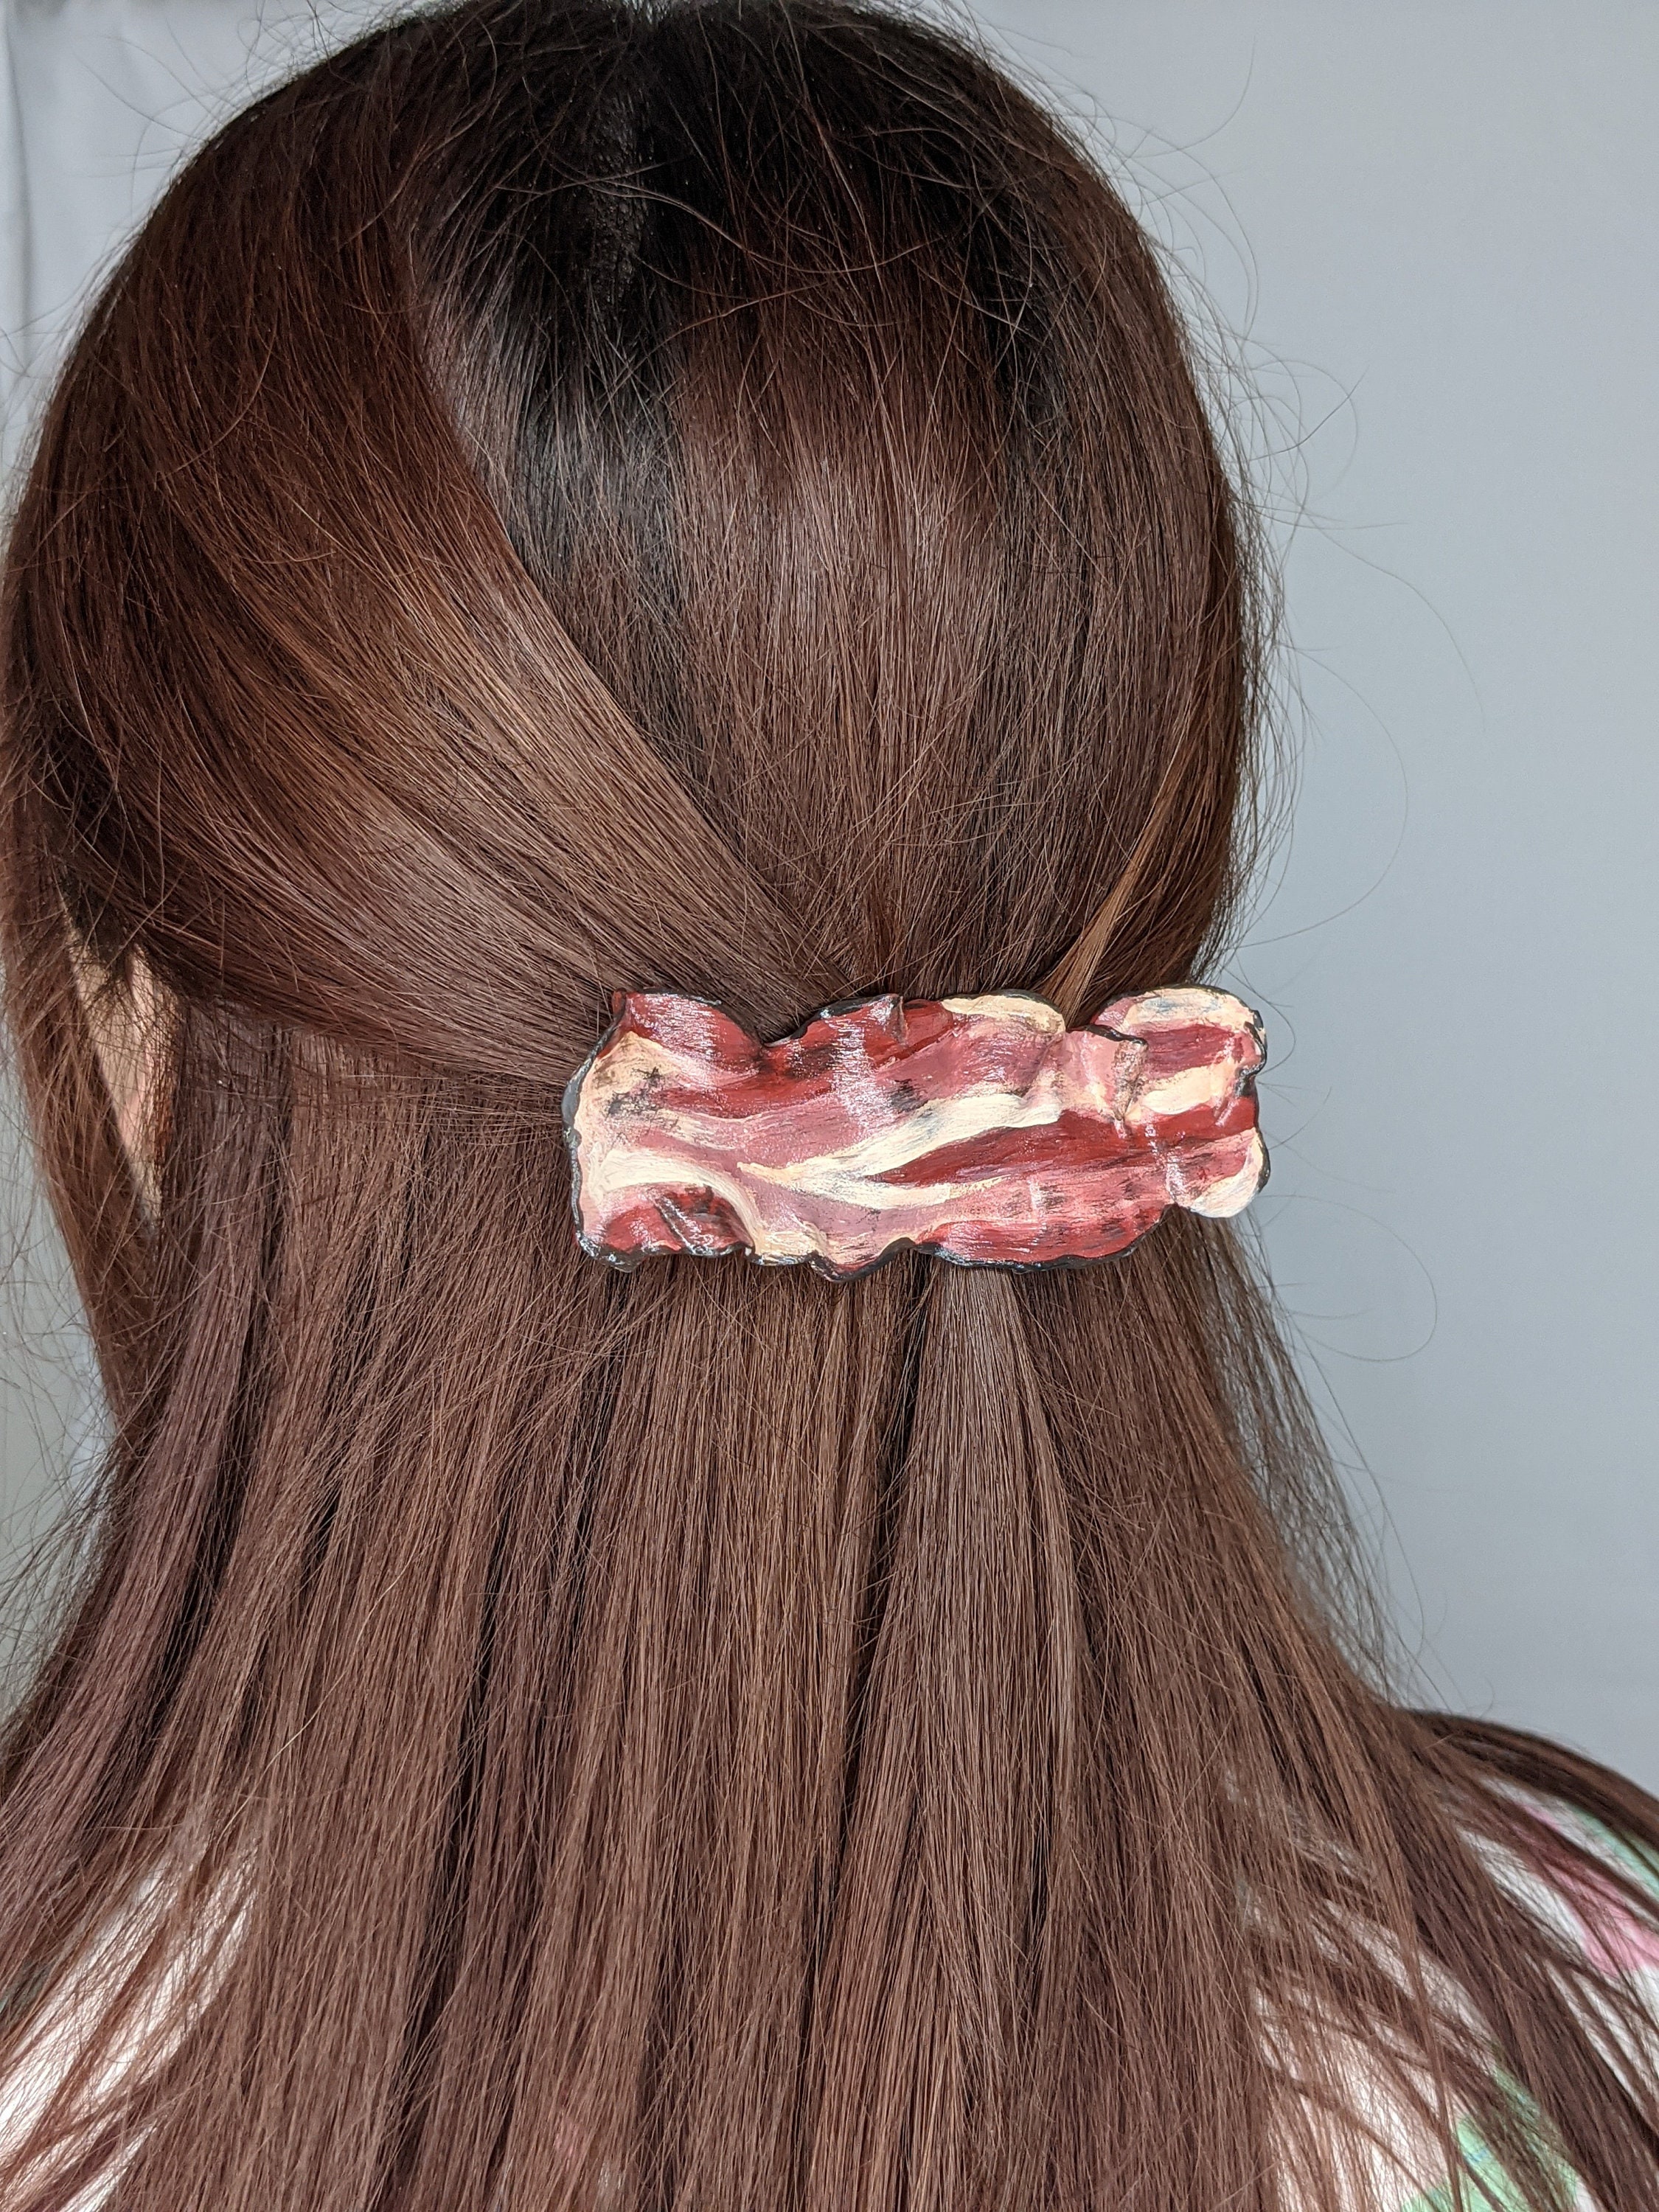 Bacon Hair Home & Living for Sale